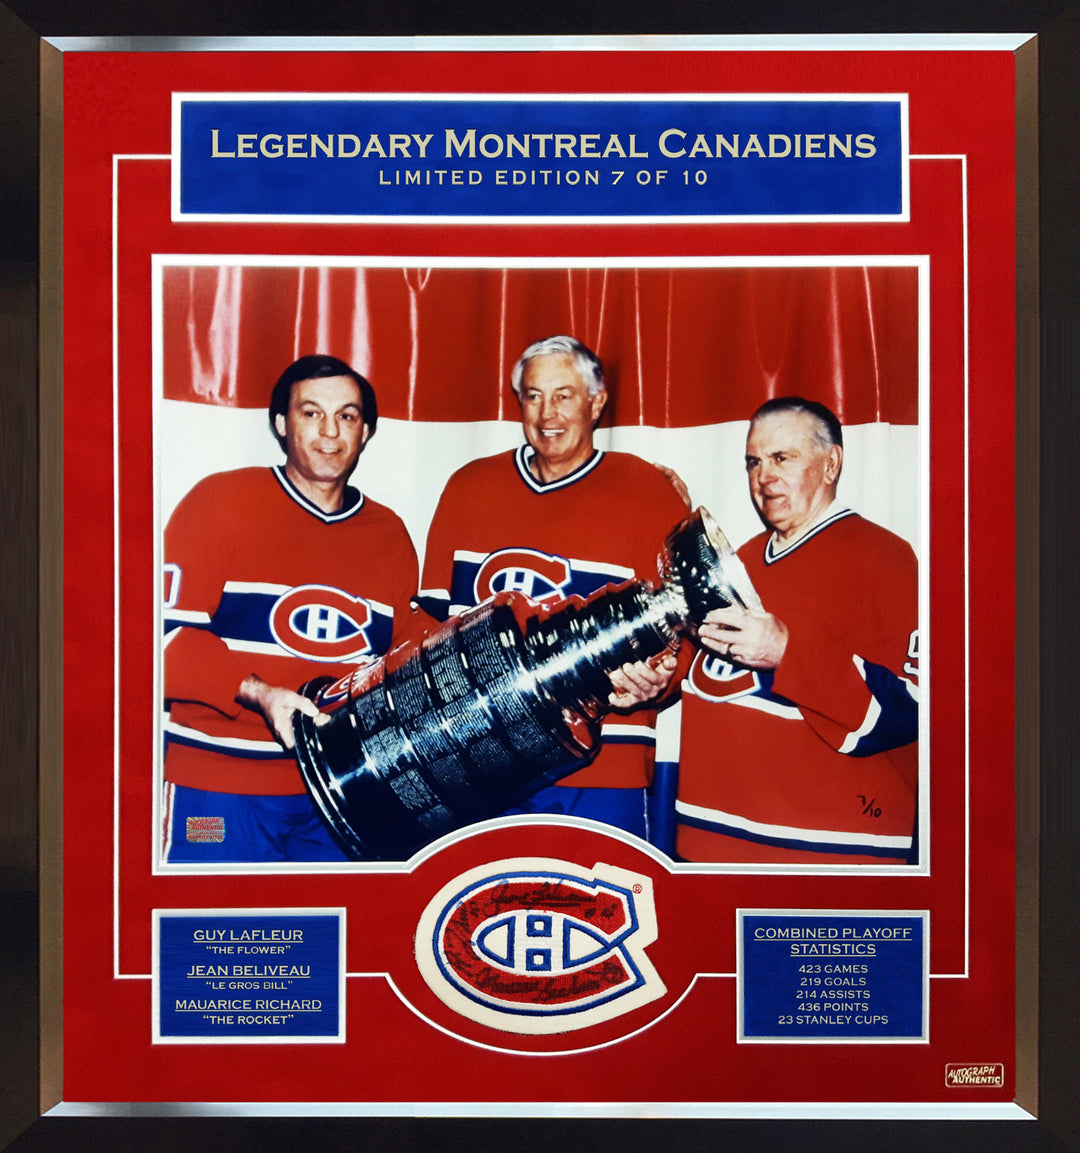 Maurice Richard, Jean Beliveau, Guy Lafleur Signed Ltd Ed /10 Patch With Photo, Montreal Canadiens, NHL, Hockey, Autographed, Signed, AACMH31945